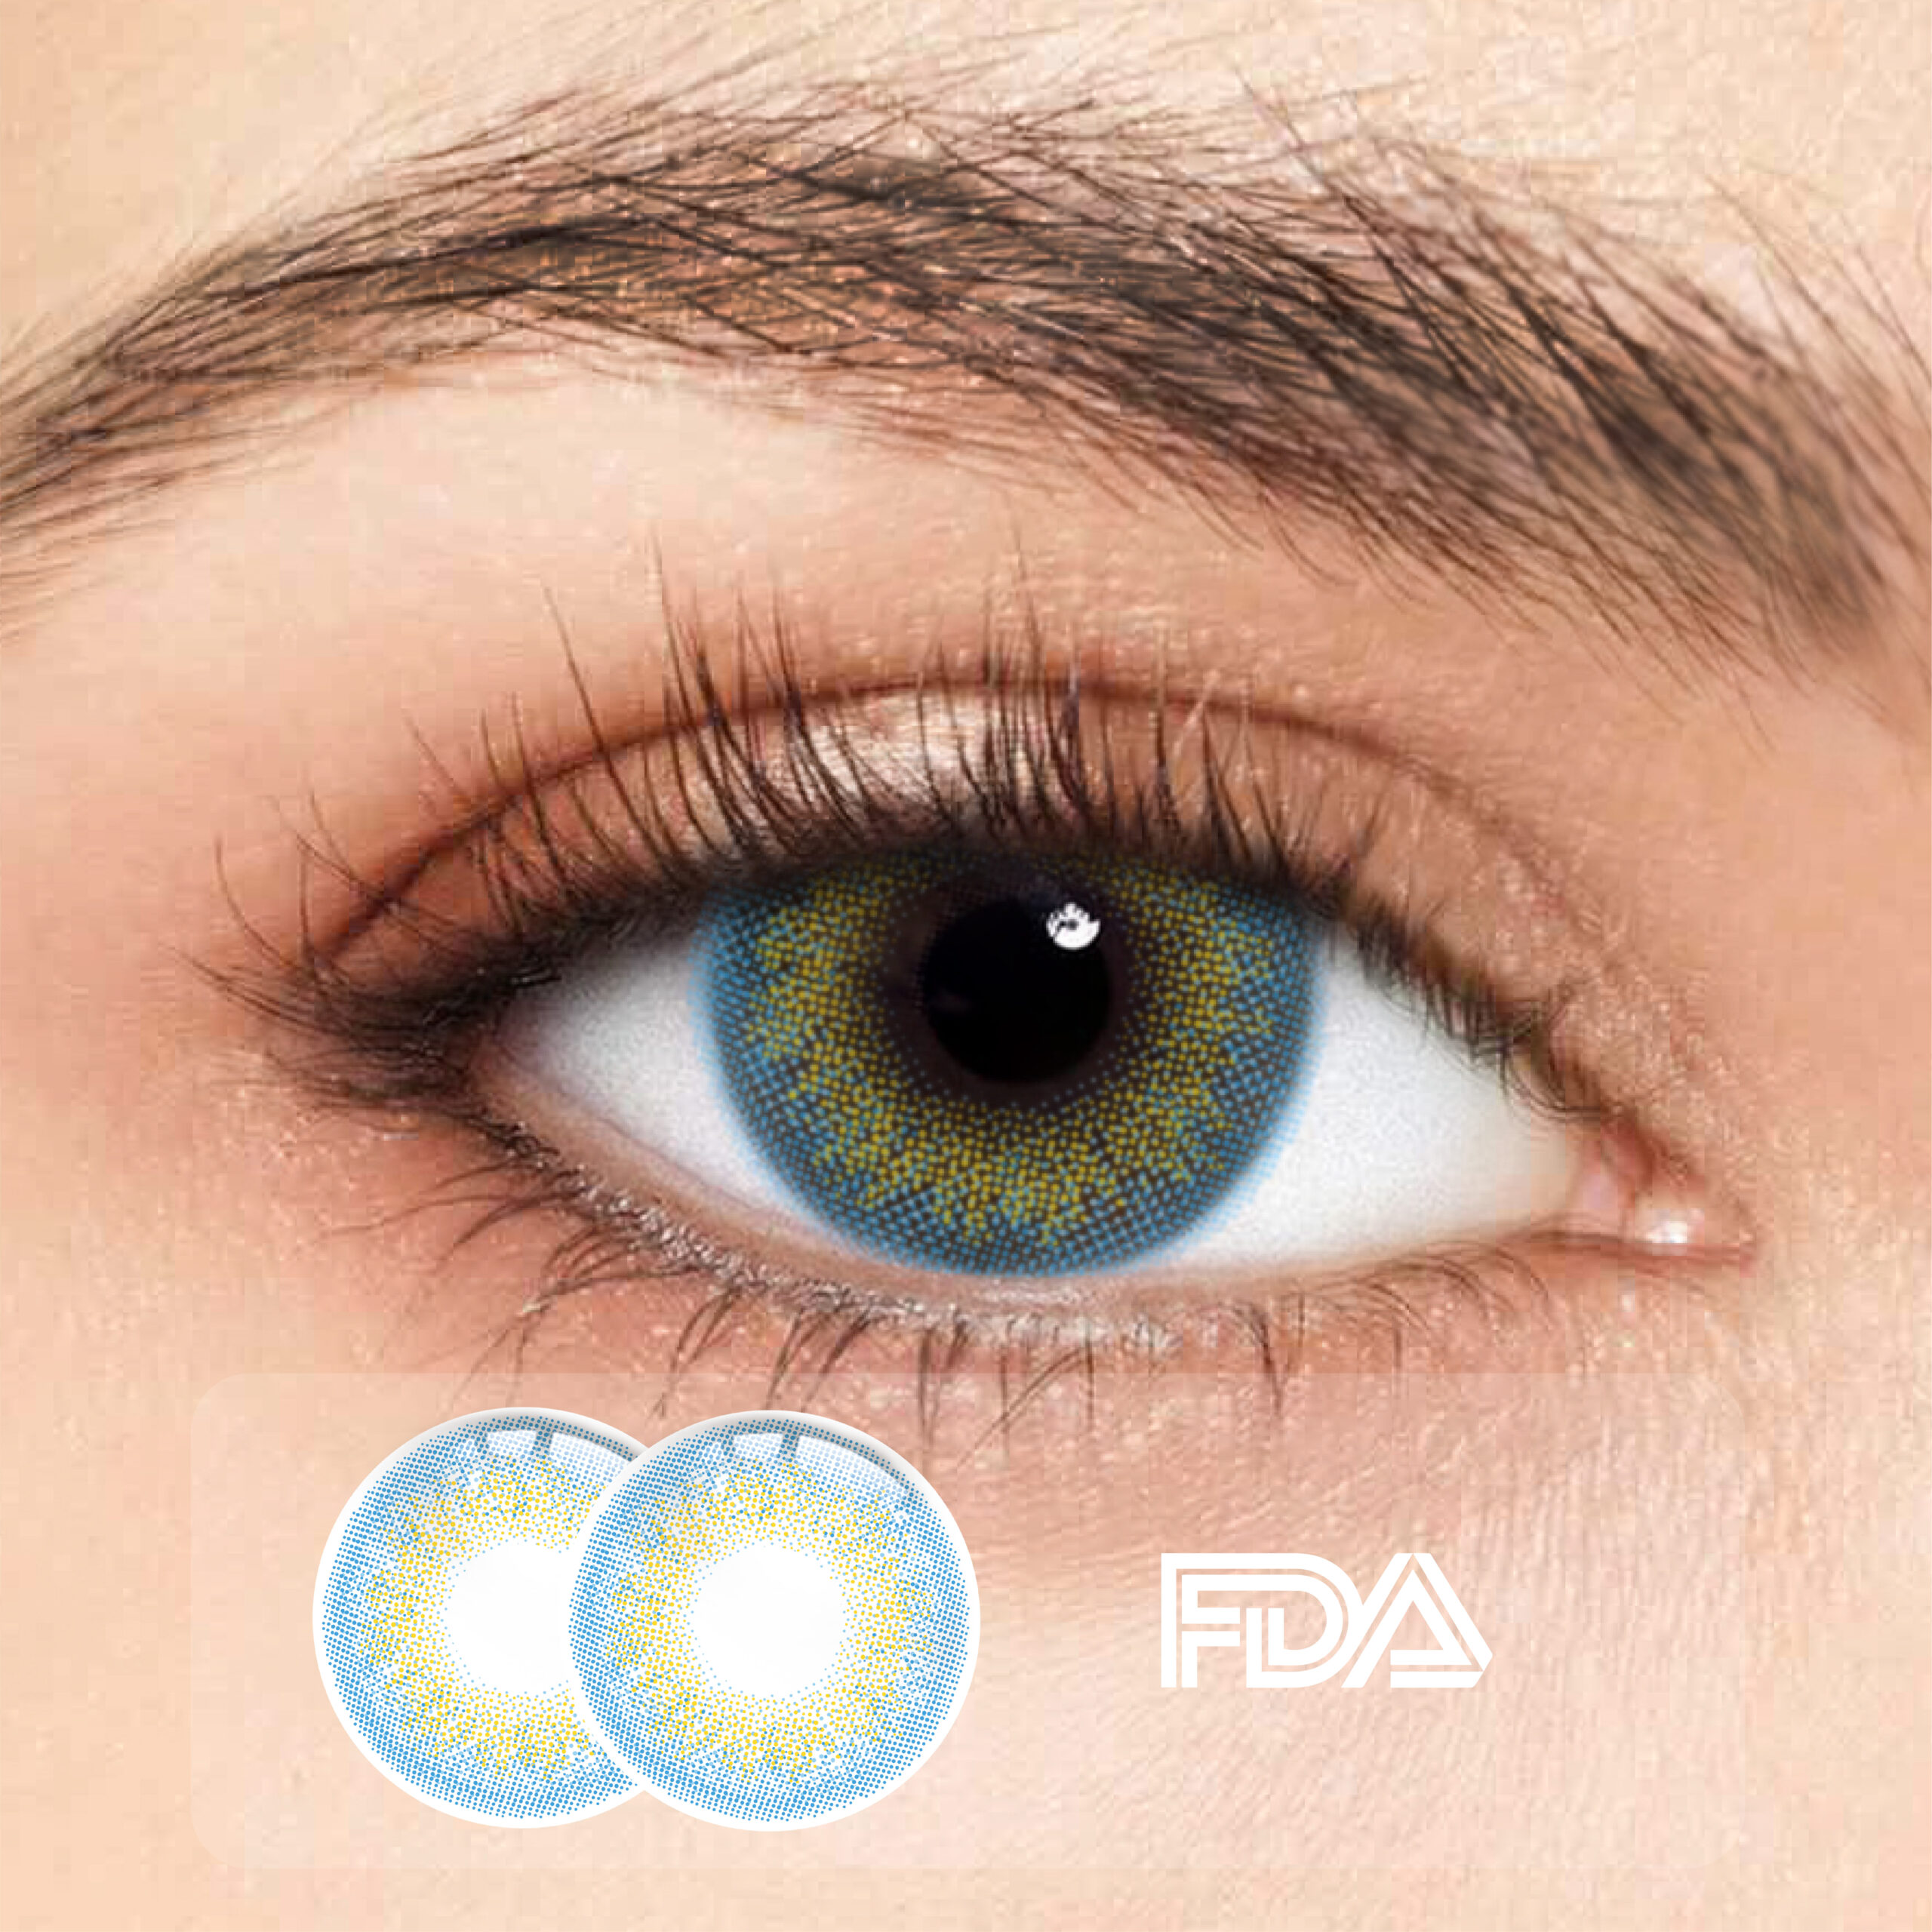 1 Pair FDA Certificate Eyes Beautiful Pupil Colorful Girl Cosplay Contact Lenses with degrees  PHALAENOPSIS DARK BLUE